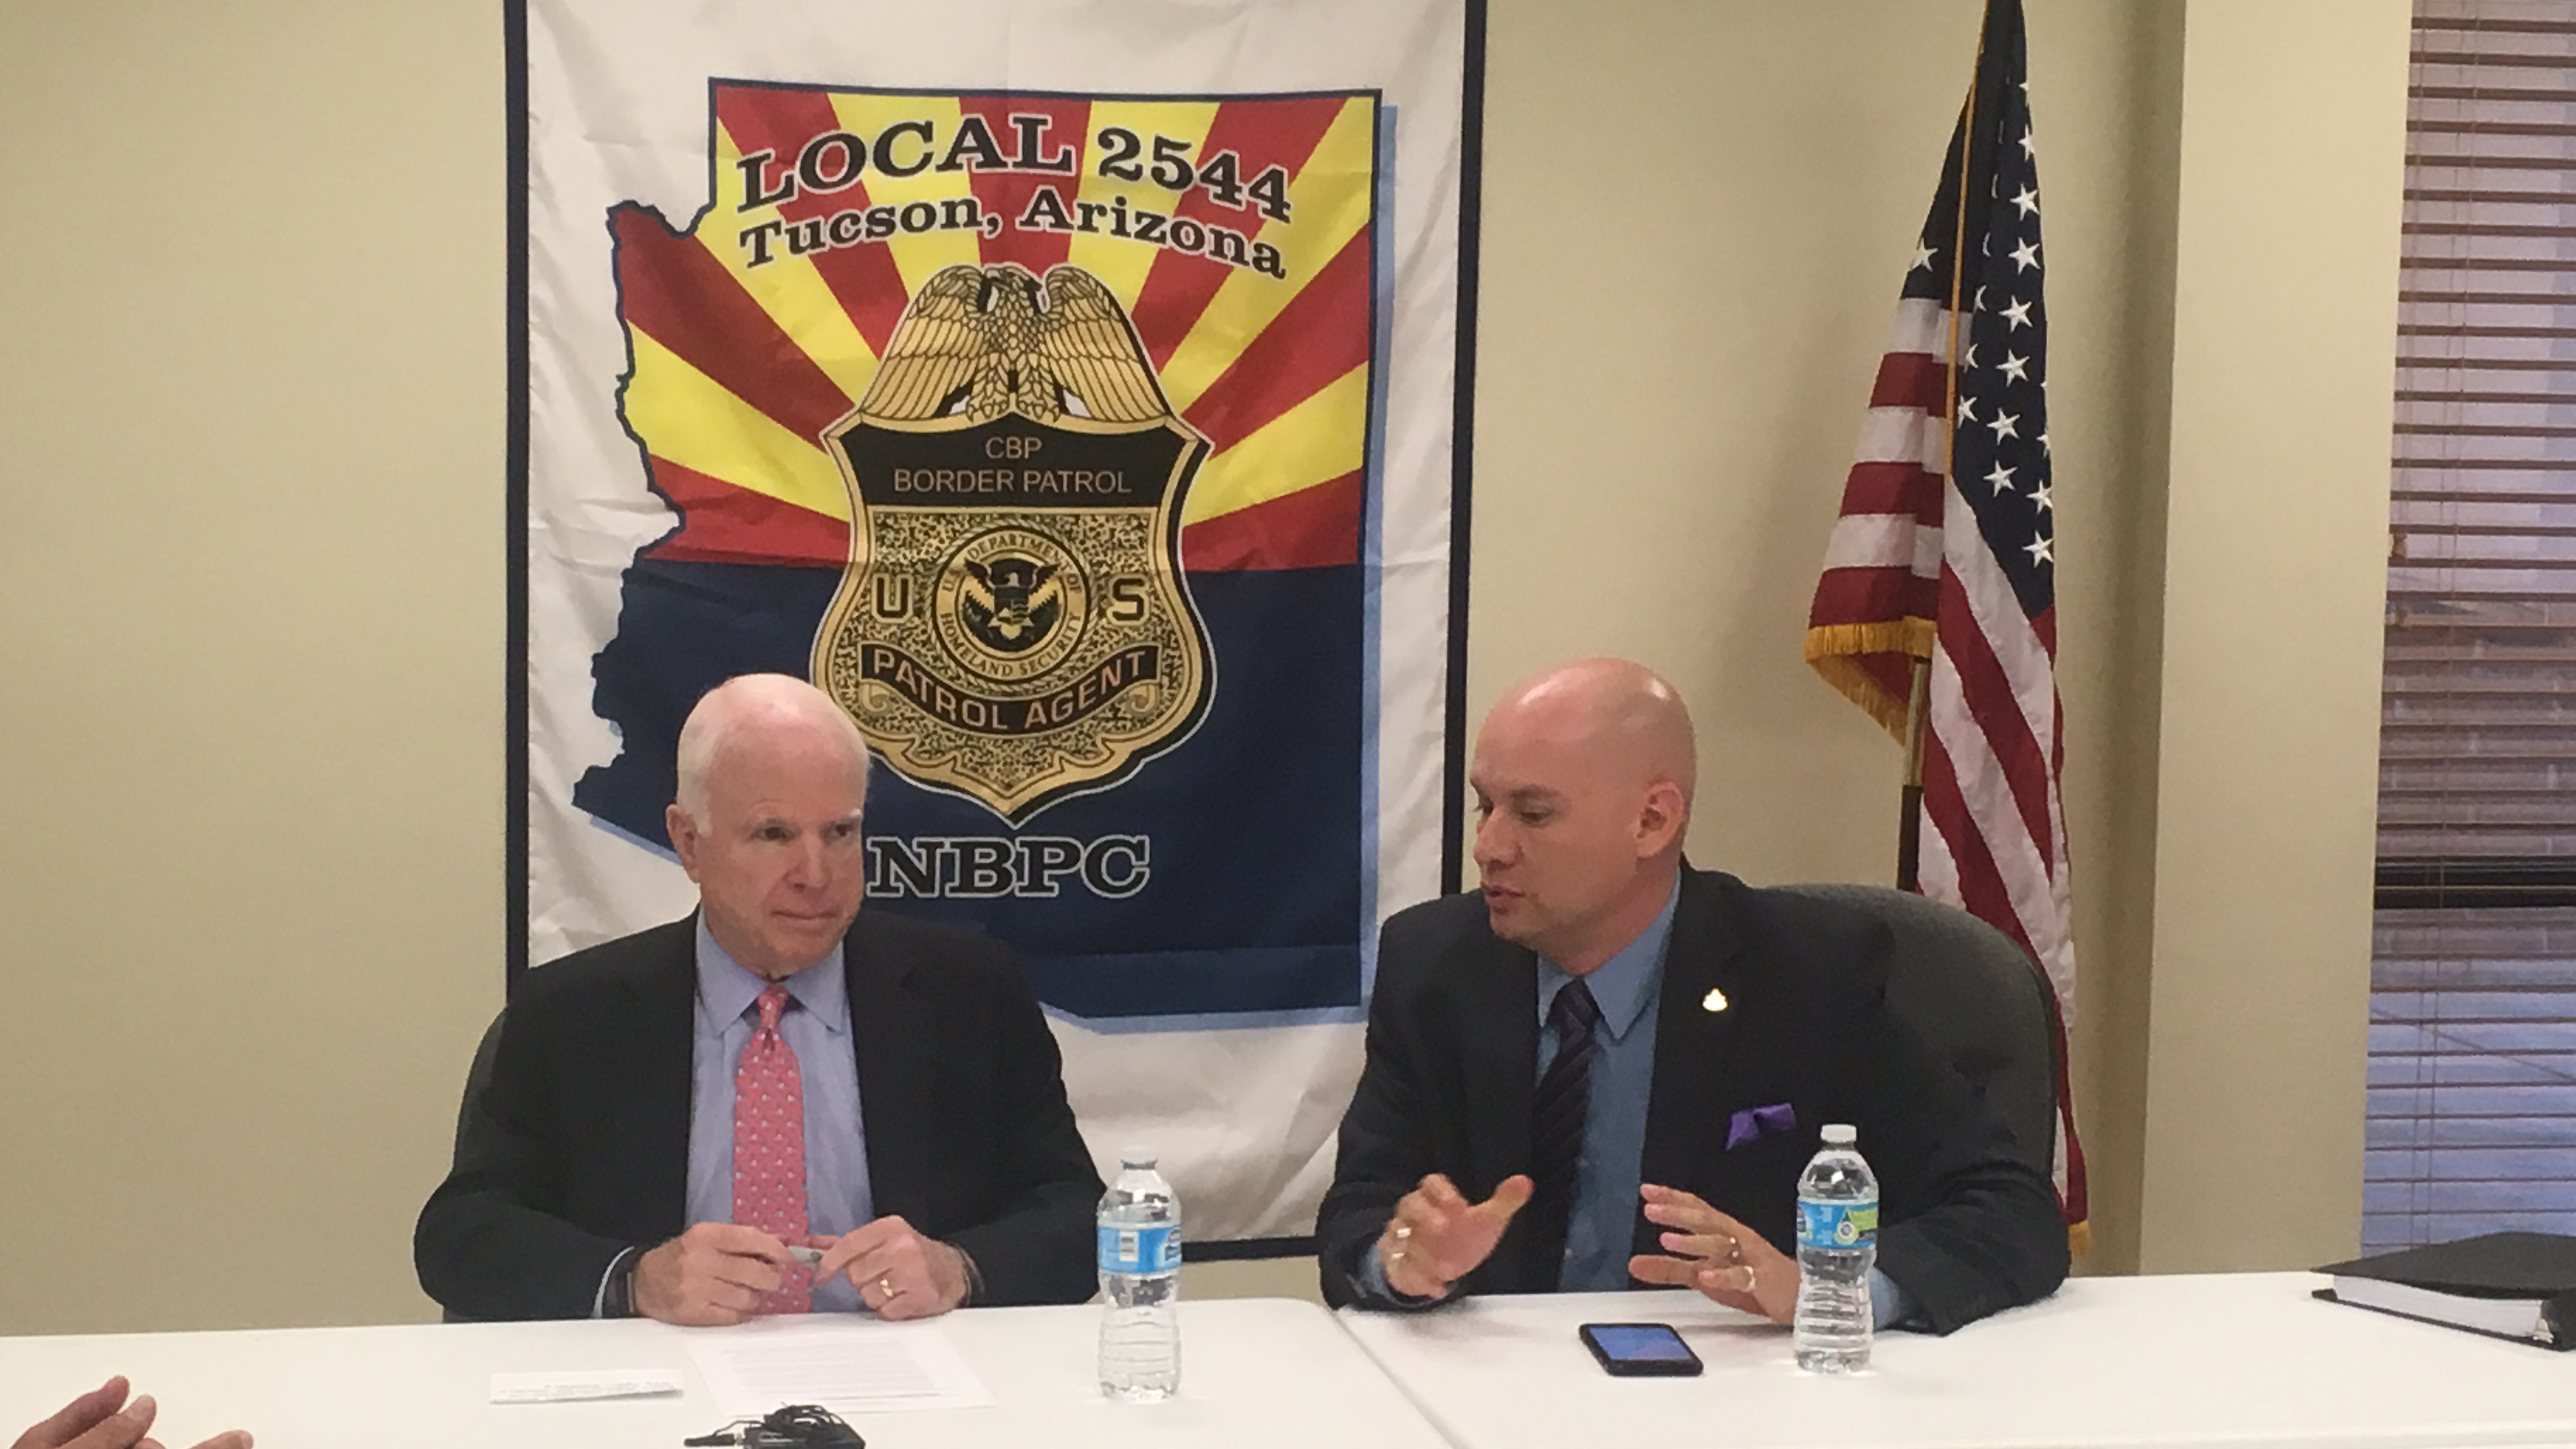 Sen. John McCain is endorsed by the National Border Patrol Council in Tucson.  Tucson Council President Art del Cueto spoke with McCain. May 31,2016